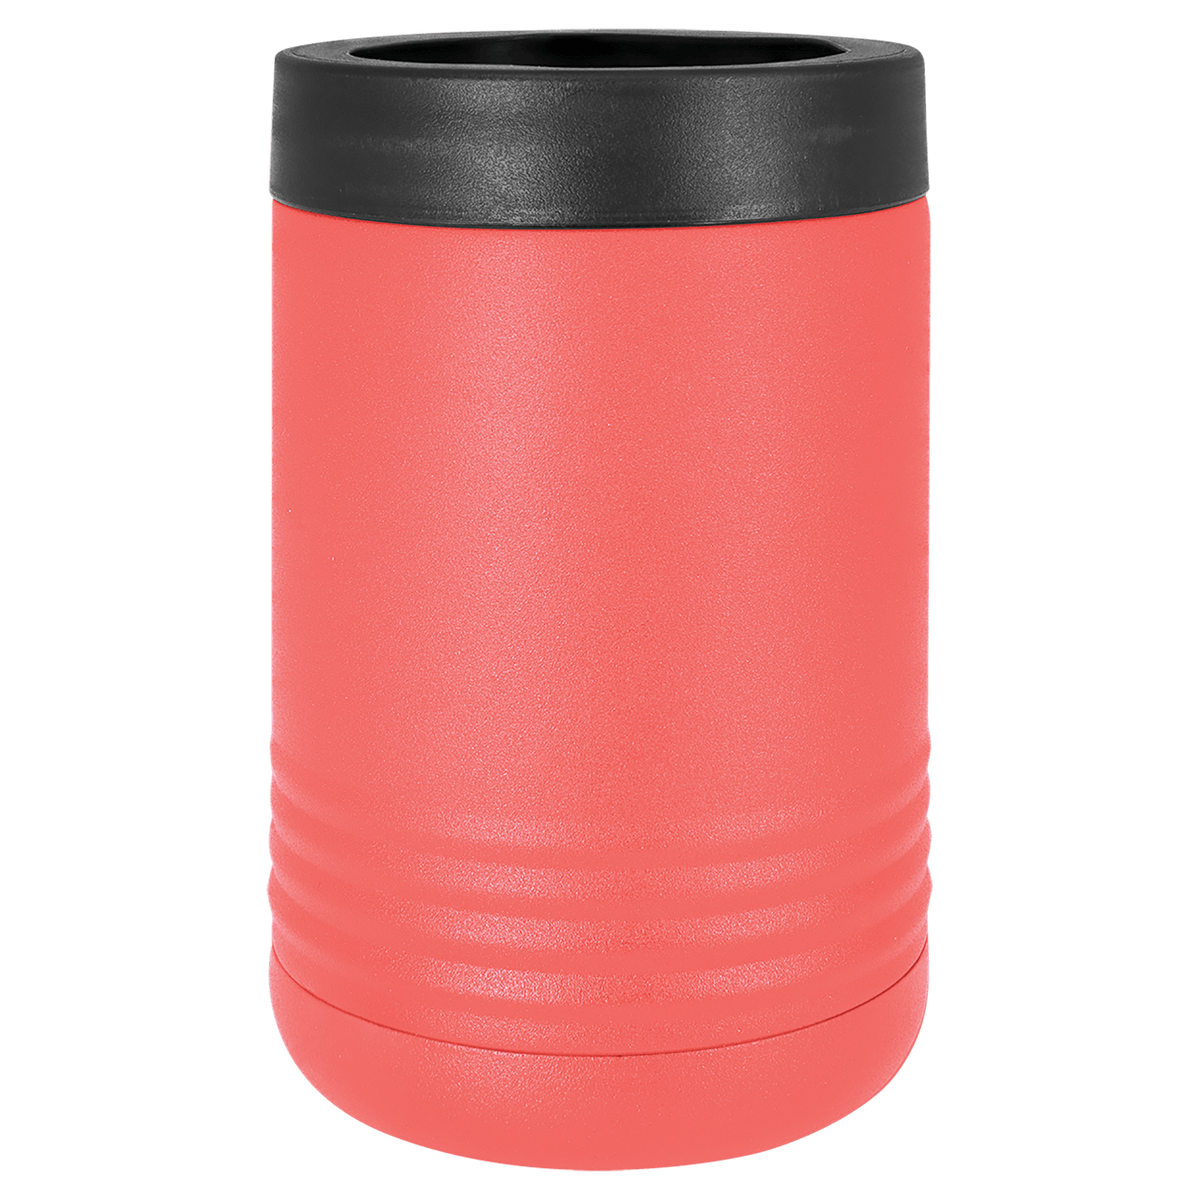 Polar Camel Stainless Steel Vacuum Insulated Beverage Holder Coral